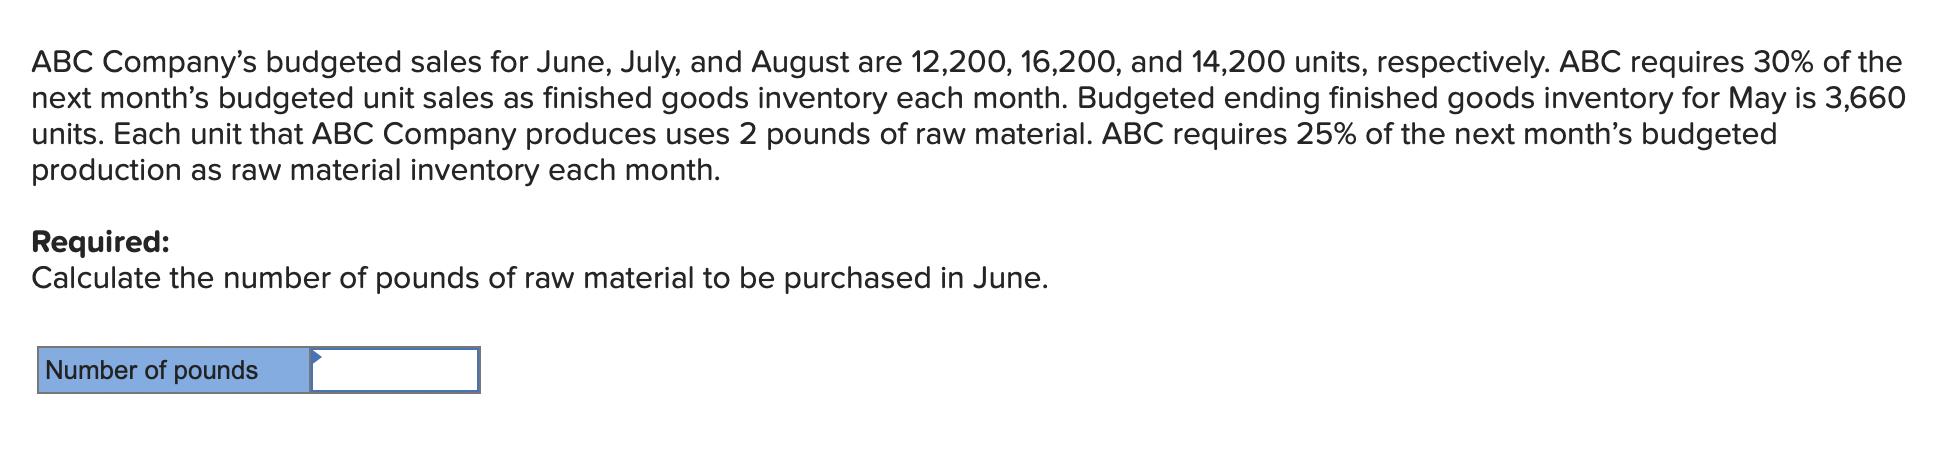 ABC Companys budgeted sales for June, July, and August are ( 12,200,16,200 ), and 14,200 units, respectively. ABC requires